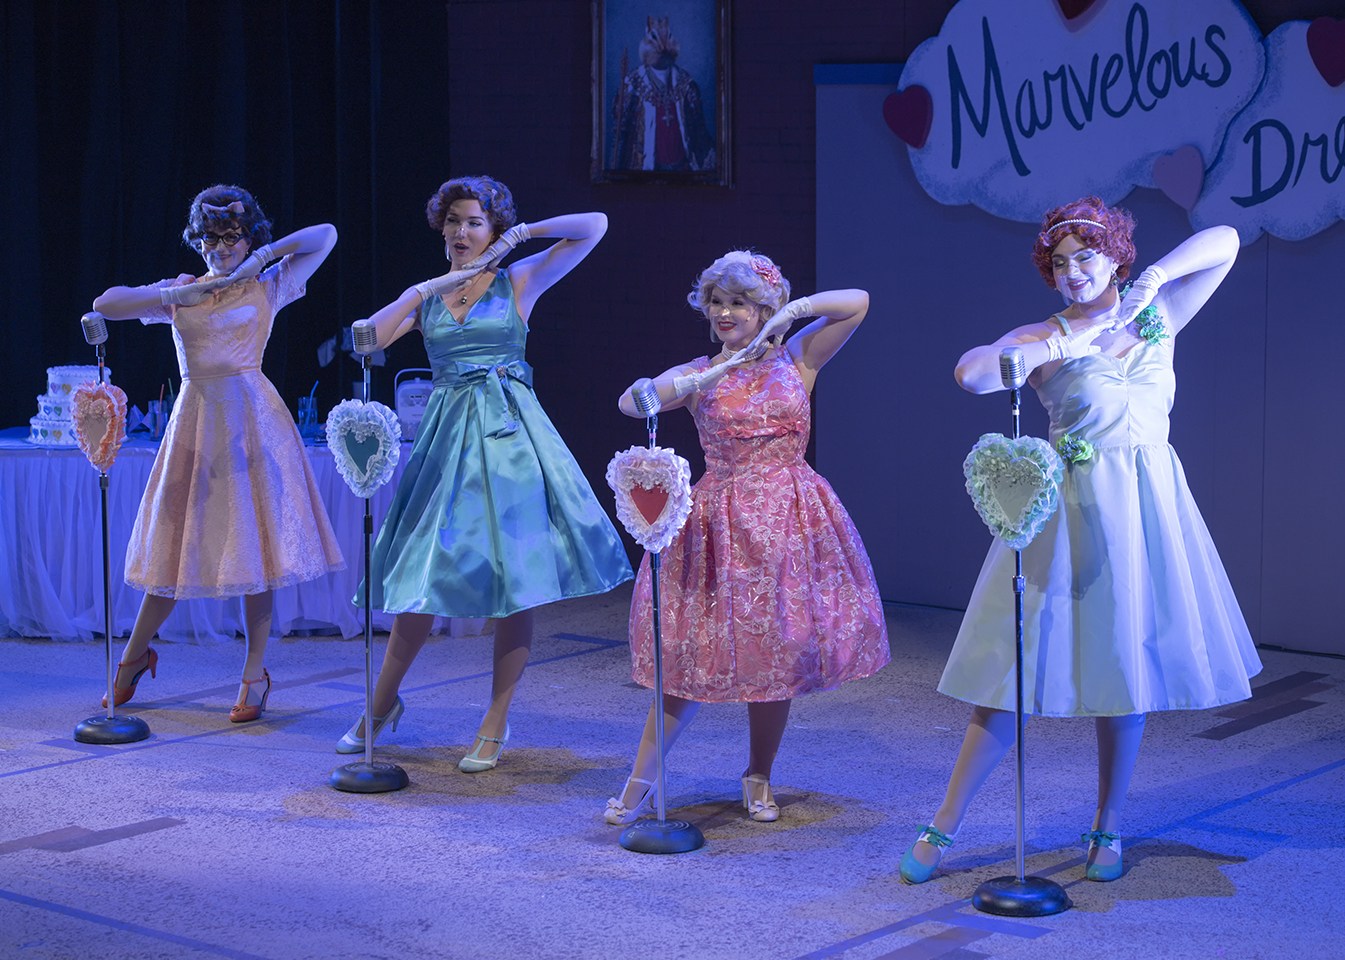 Missy (Isabel Julazadeh), Suzy (Sarah Davidson), Cindy Lou (Sara Sanderson), and Betty Jean (Sarah Cleeland) delight audiences with performances of nostalgic 50's and 60's music. 